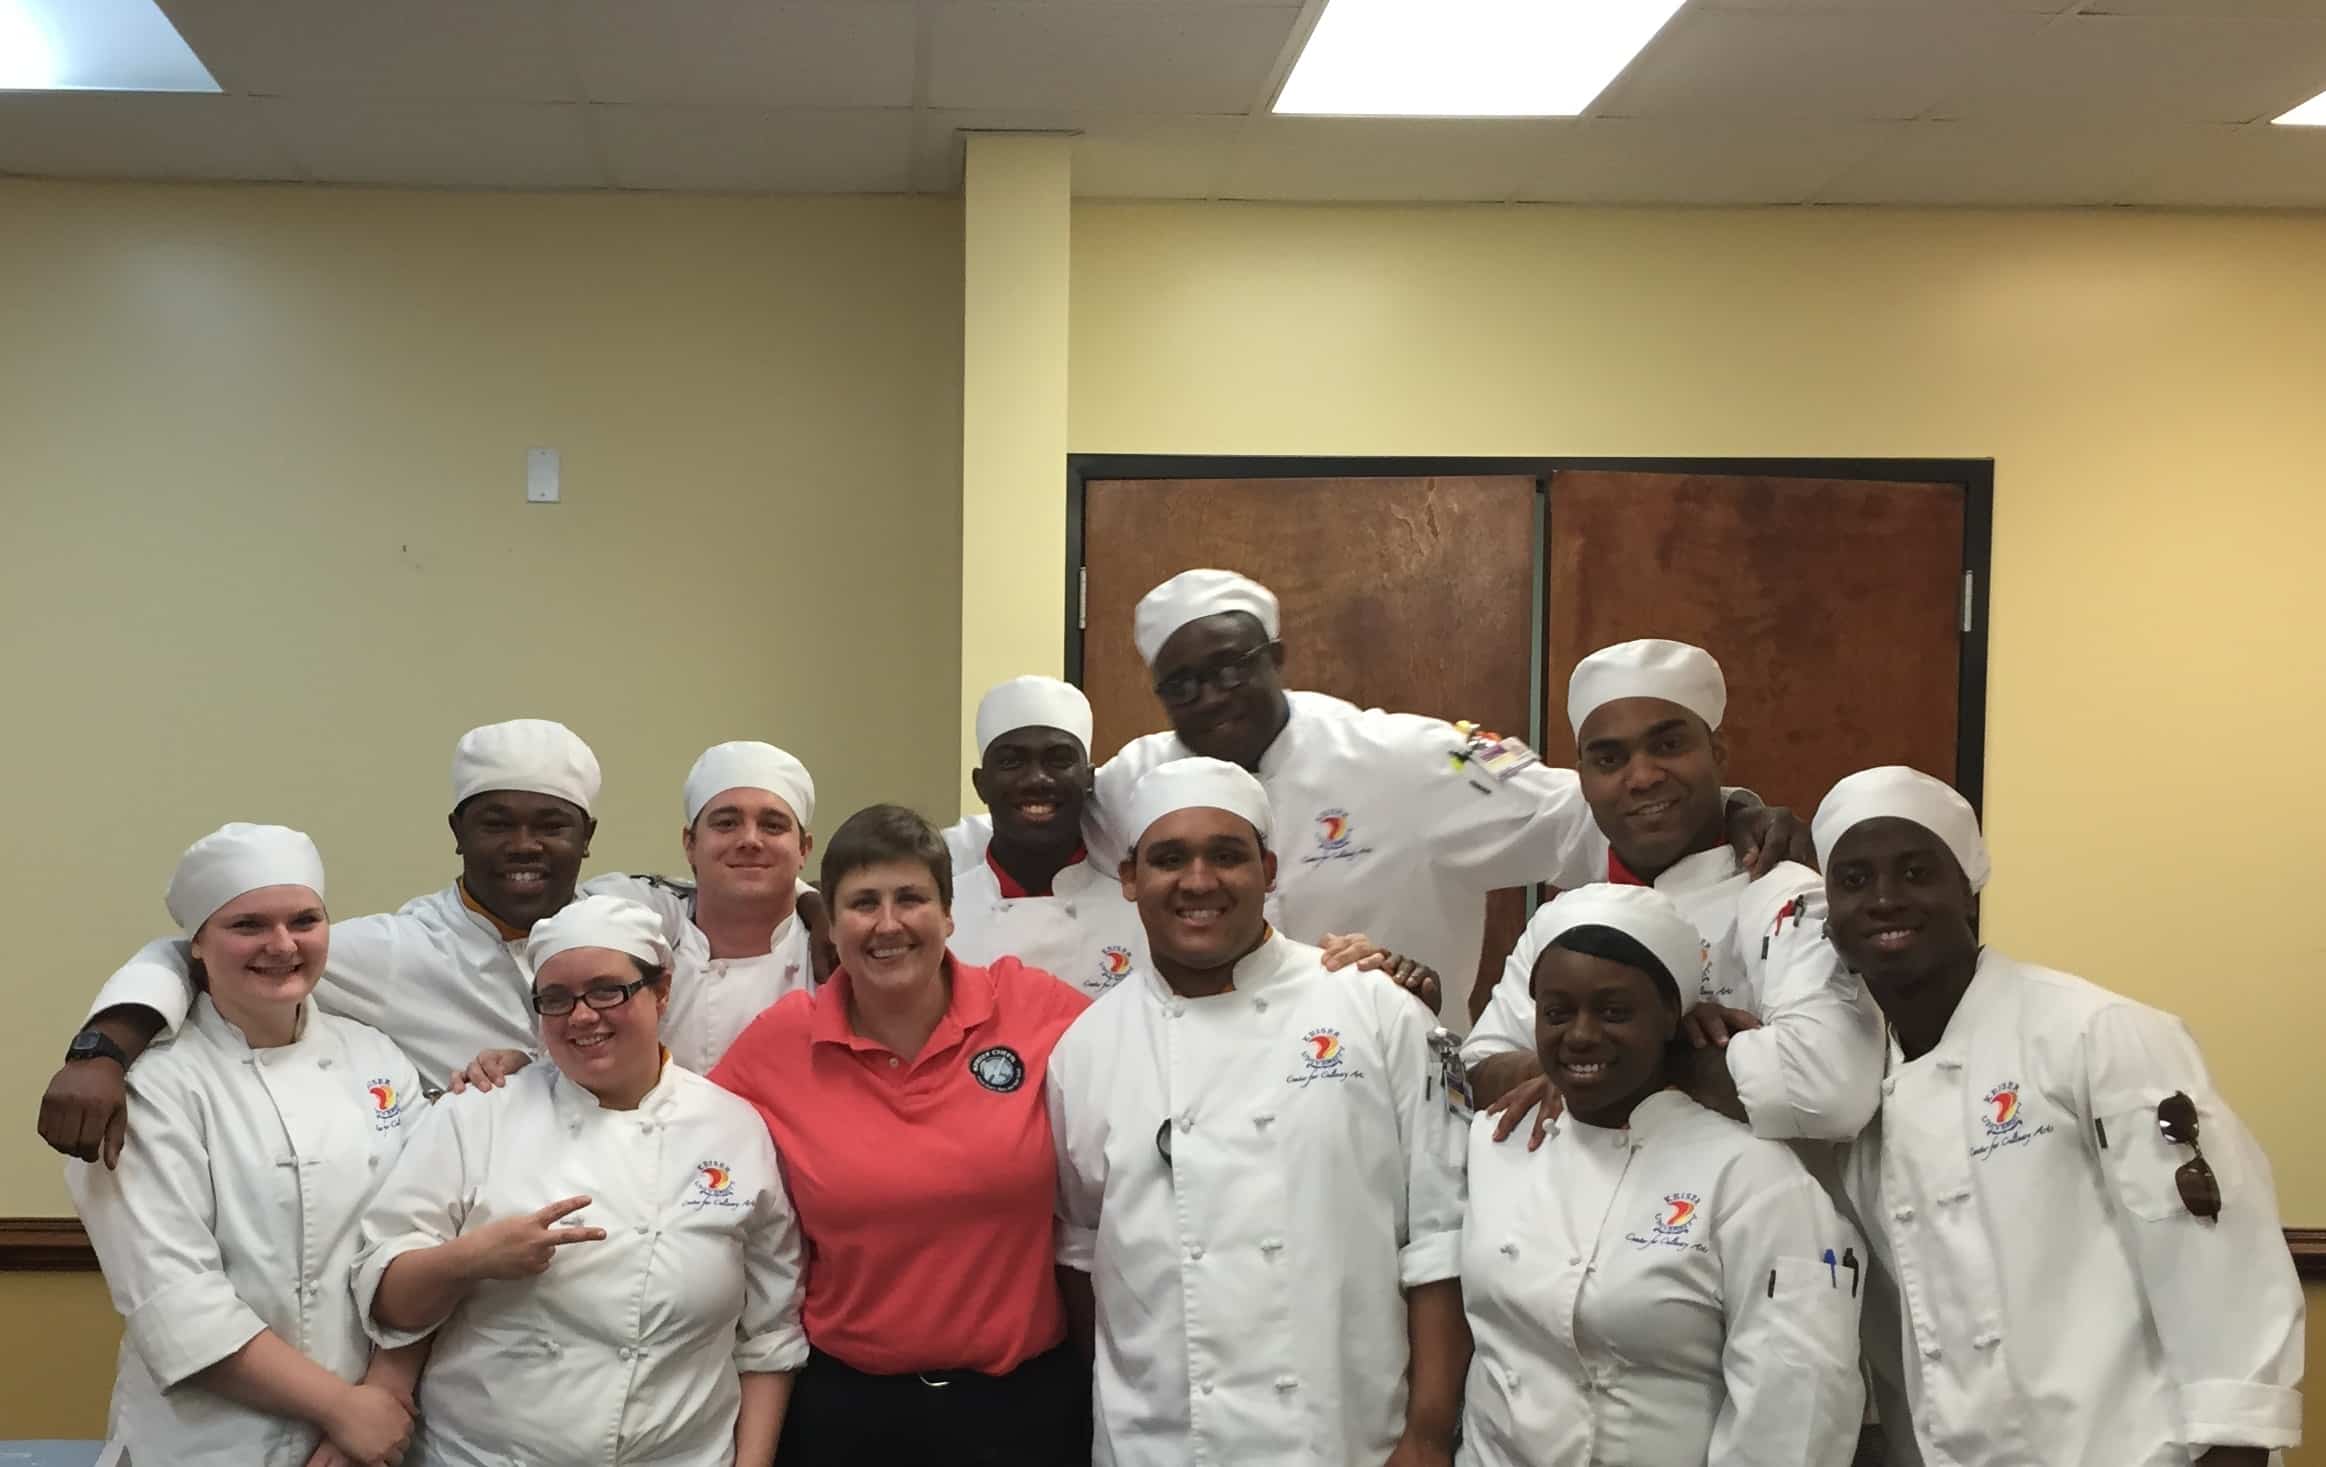 Tallahassee Culinary Arts Students are Visited by the Owner of Street Chefs Food Truck